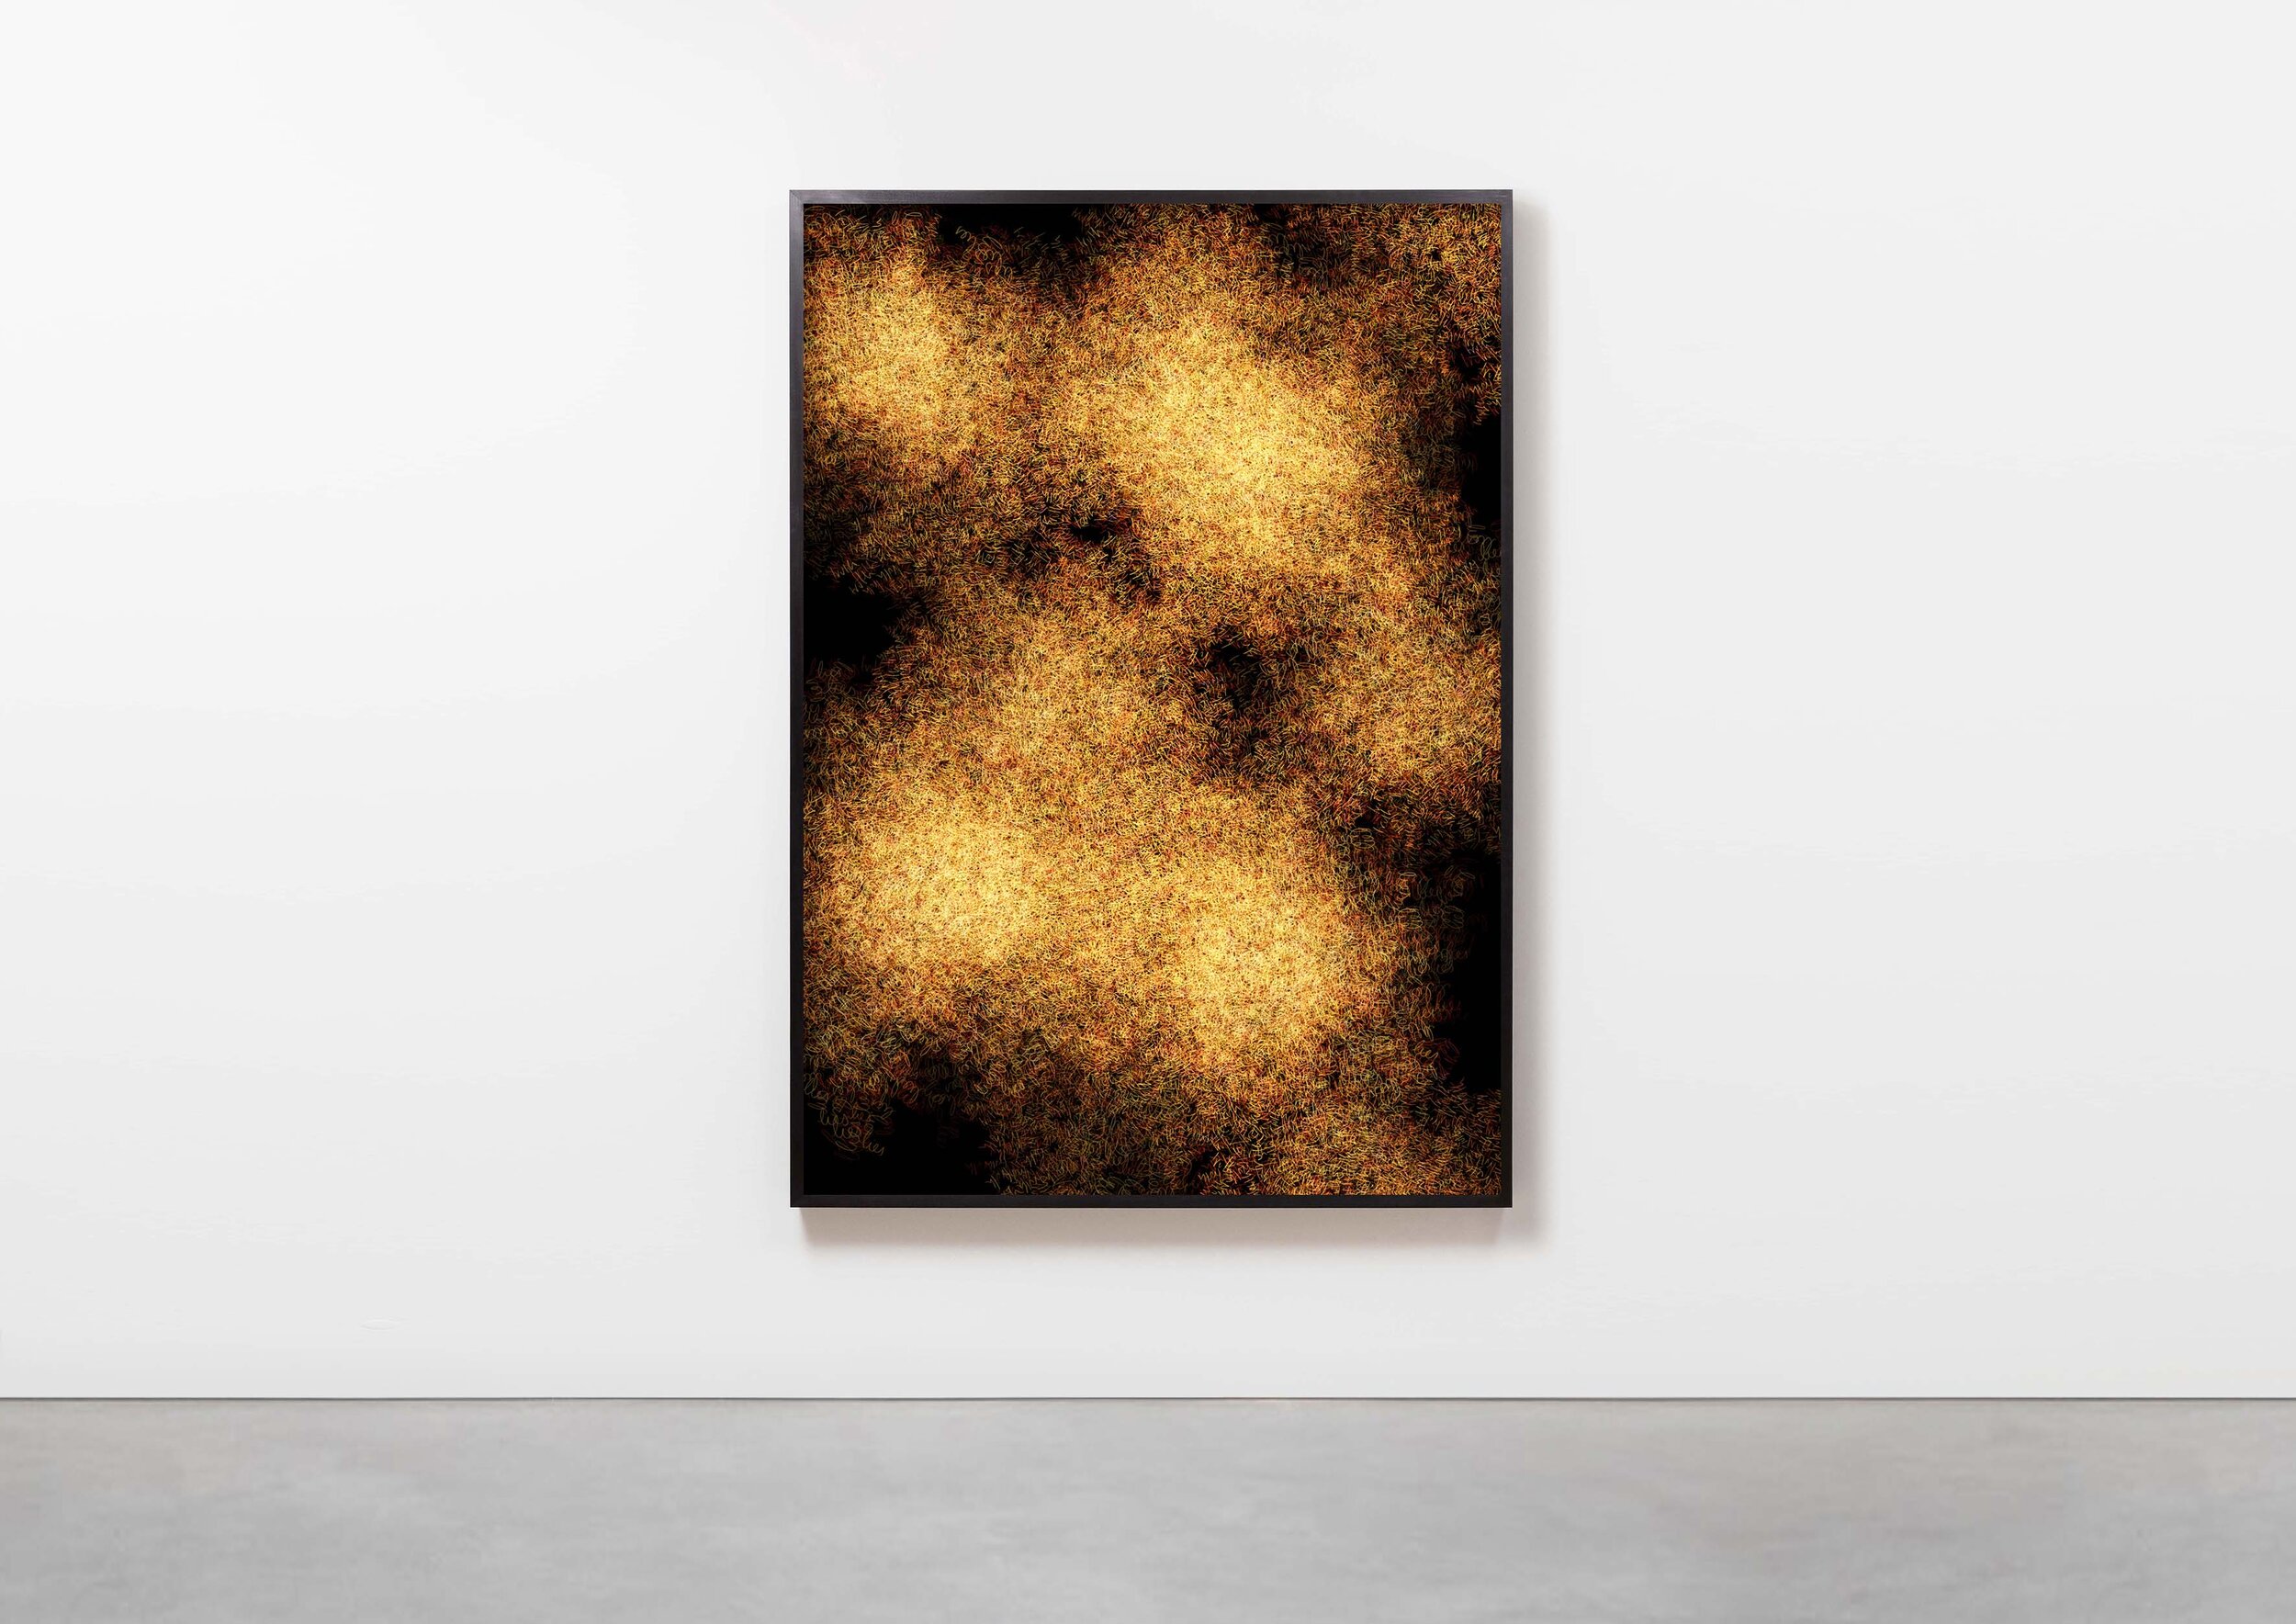 Barnaby Barford, 'Lies & Truth (Black and Gold)', 2019